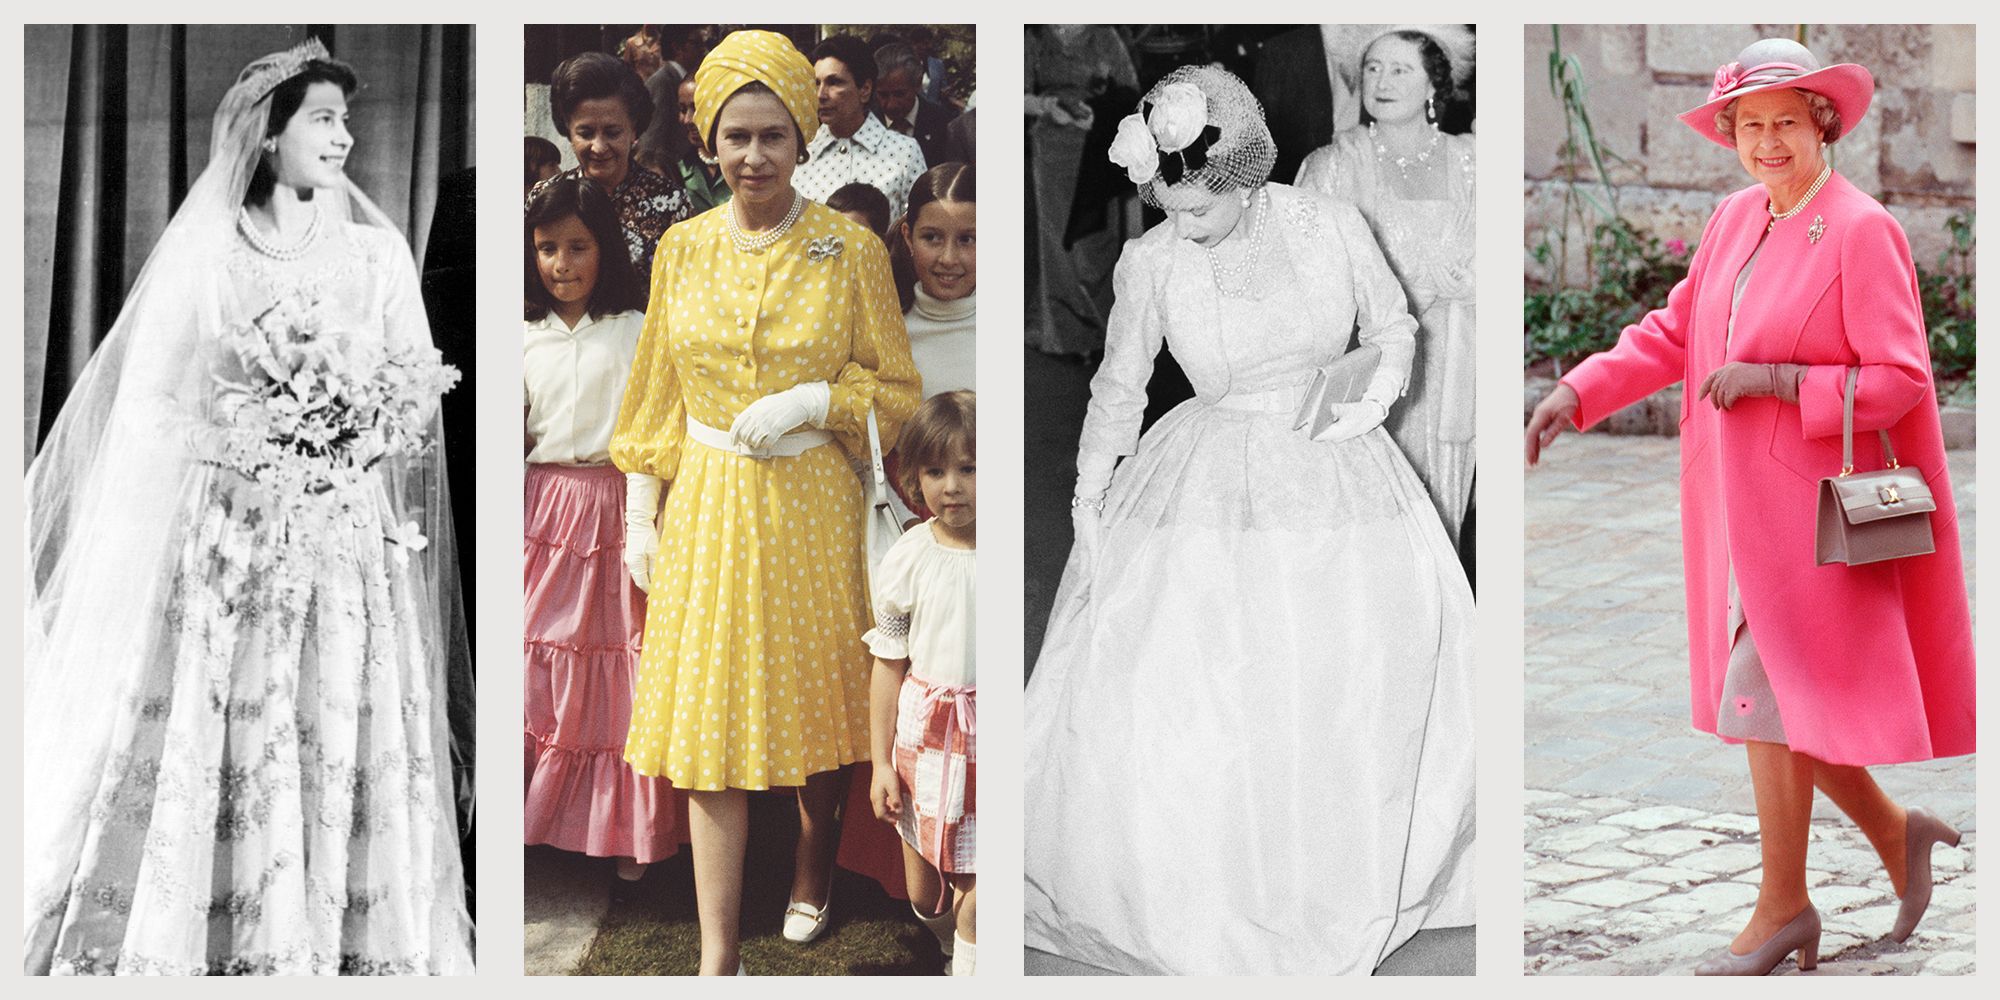 The Queen Elizabeth The Queen Mother Clothes Designed by Norman Hartnell